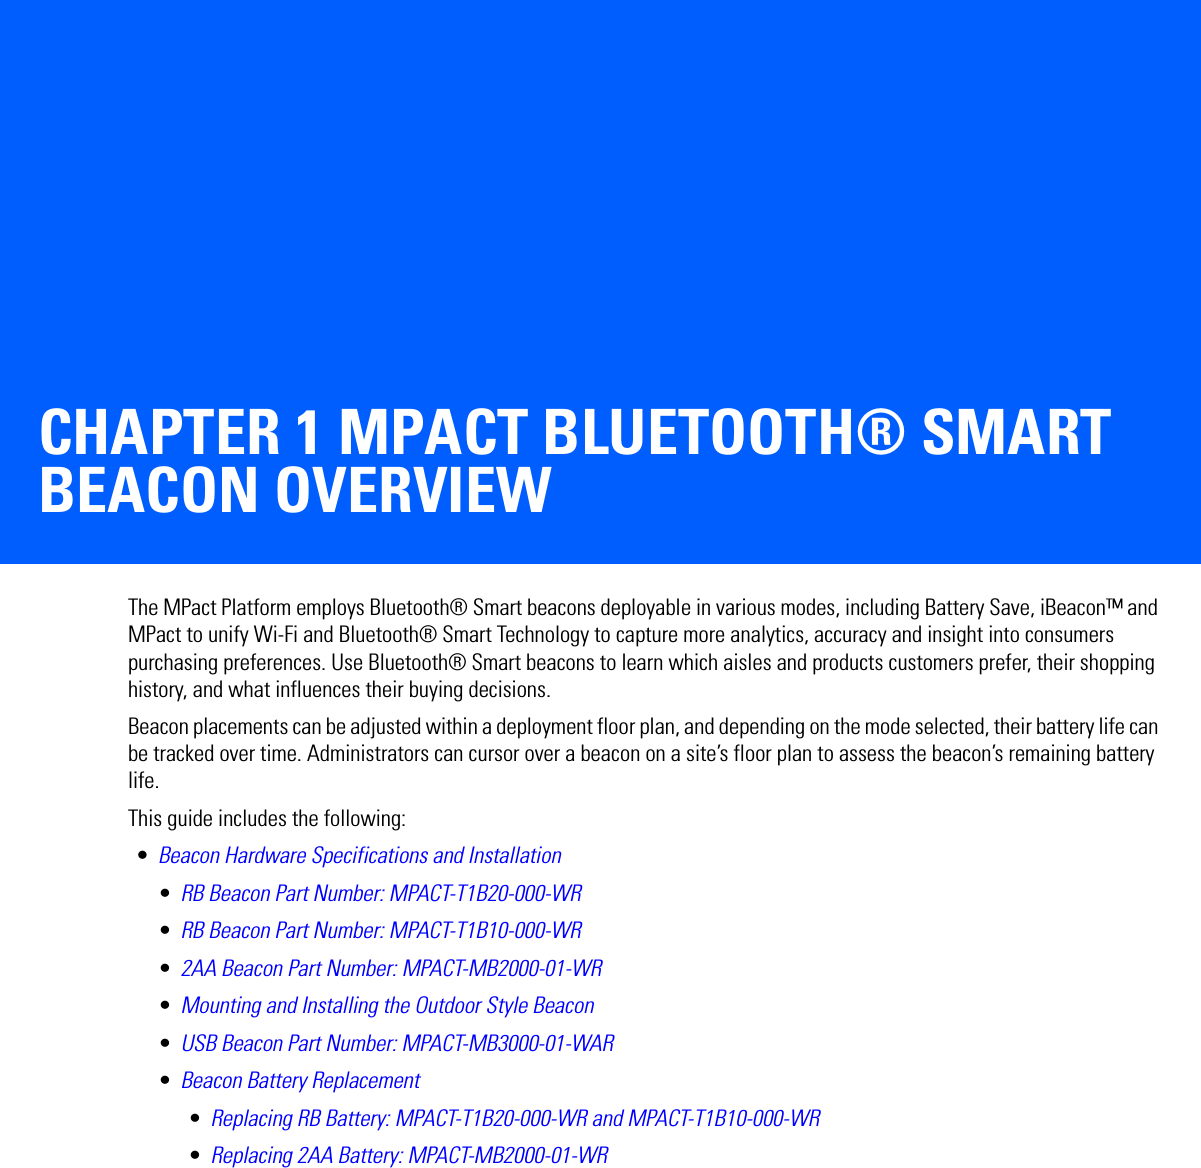 CHAPTER 1 MPACT BLUETOOTH® SMART BEACON OVERVIEWThe MPact Platform employs Bluetooth® Smart beacons deployable in various modes, including Battery Save, iBeacon™ and MPact to unify Wi-Fi and Bluetooth® Smart Technology to capture more analytics, accuracy and insight into consumers purchasing preferences. Use Bluetooth® Smart beacons to learn which aisles and products customers prefer, their shopping history, and what influences their buying decisions.Beacon placements can be adjusted within a deployment floor plan, and depending on the mode selected, their battery life can be tracked over time. Administrators can cursor over a beacon on a site’s floor plan to assess the beacon’s remaining battery life.This guide includes the following: •Beacon Hardware Specifications and Installation•RB Beacon Part Number: MPACT-T1B20-000-WR•RB Beacon Part Number: MPACT-T1B10-000-WR•2AA Beacon Part Number: MPACT-MB2000-01-WR•Mounting and Installing the Outdoor Style Beacon•USB Beacon Part Number: MPACT-MB3000-01-WAR•Beacon Battery Replacement•Replacing RB Battery: MPACT-T1B20-000-WR and MPACT-T1B10-000-WR•Replacing 2AA Battery: MPACT-MB2000-01-WR